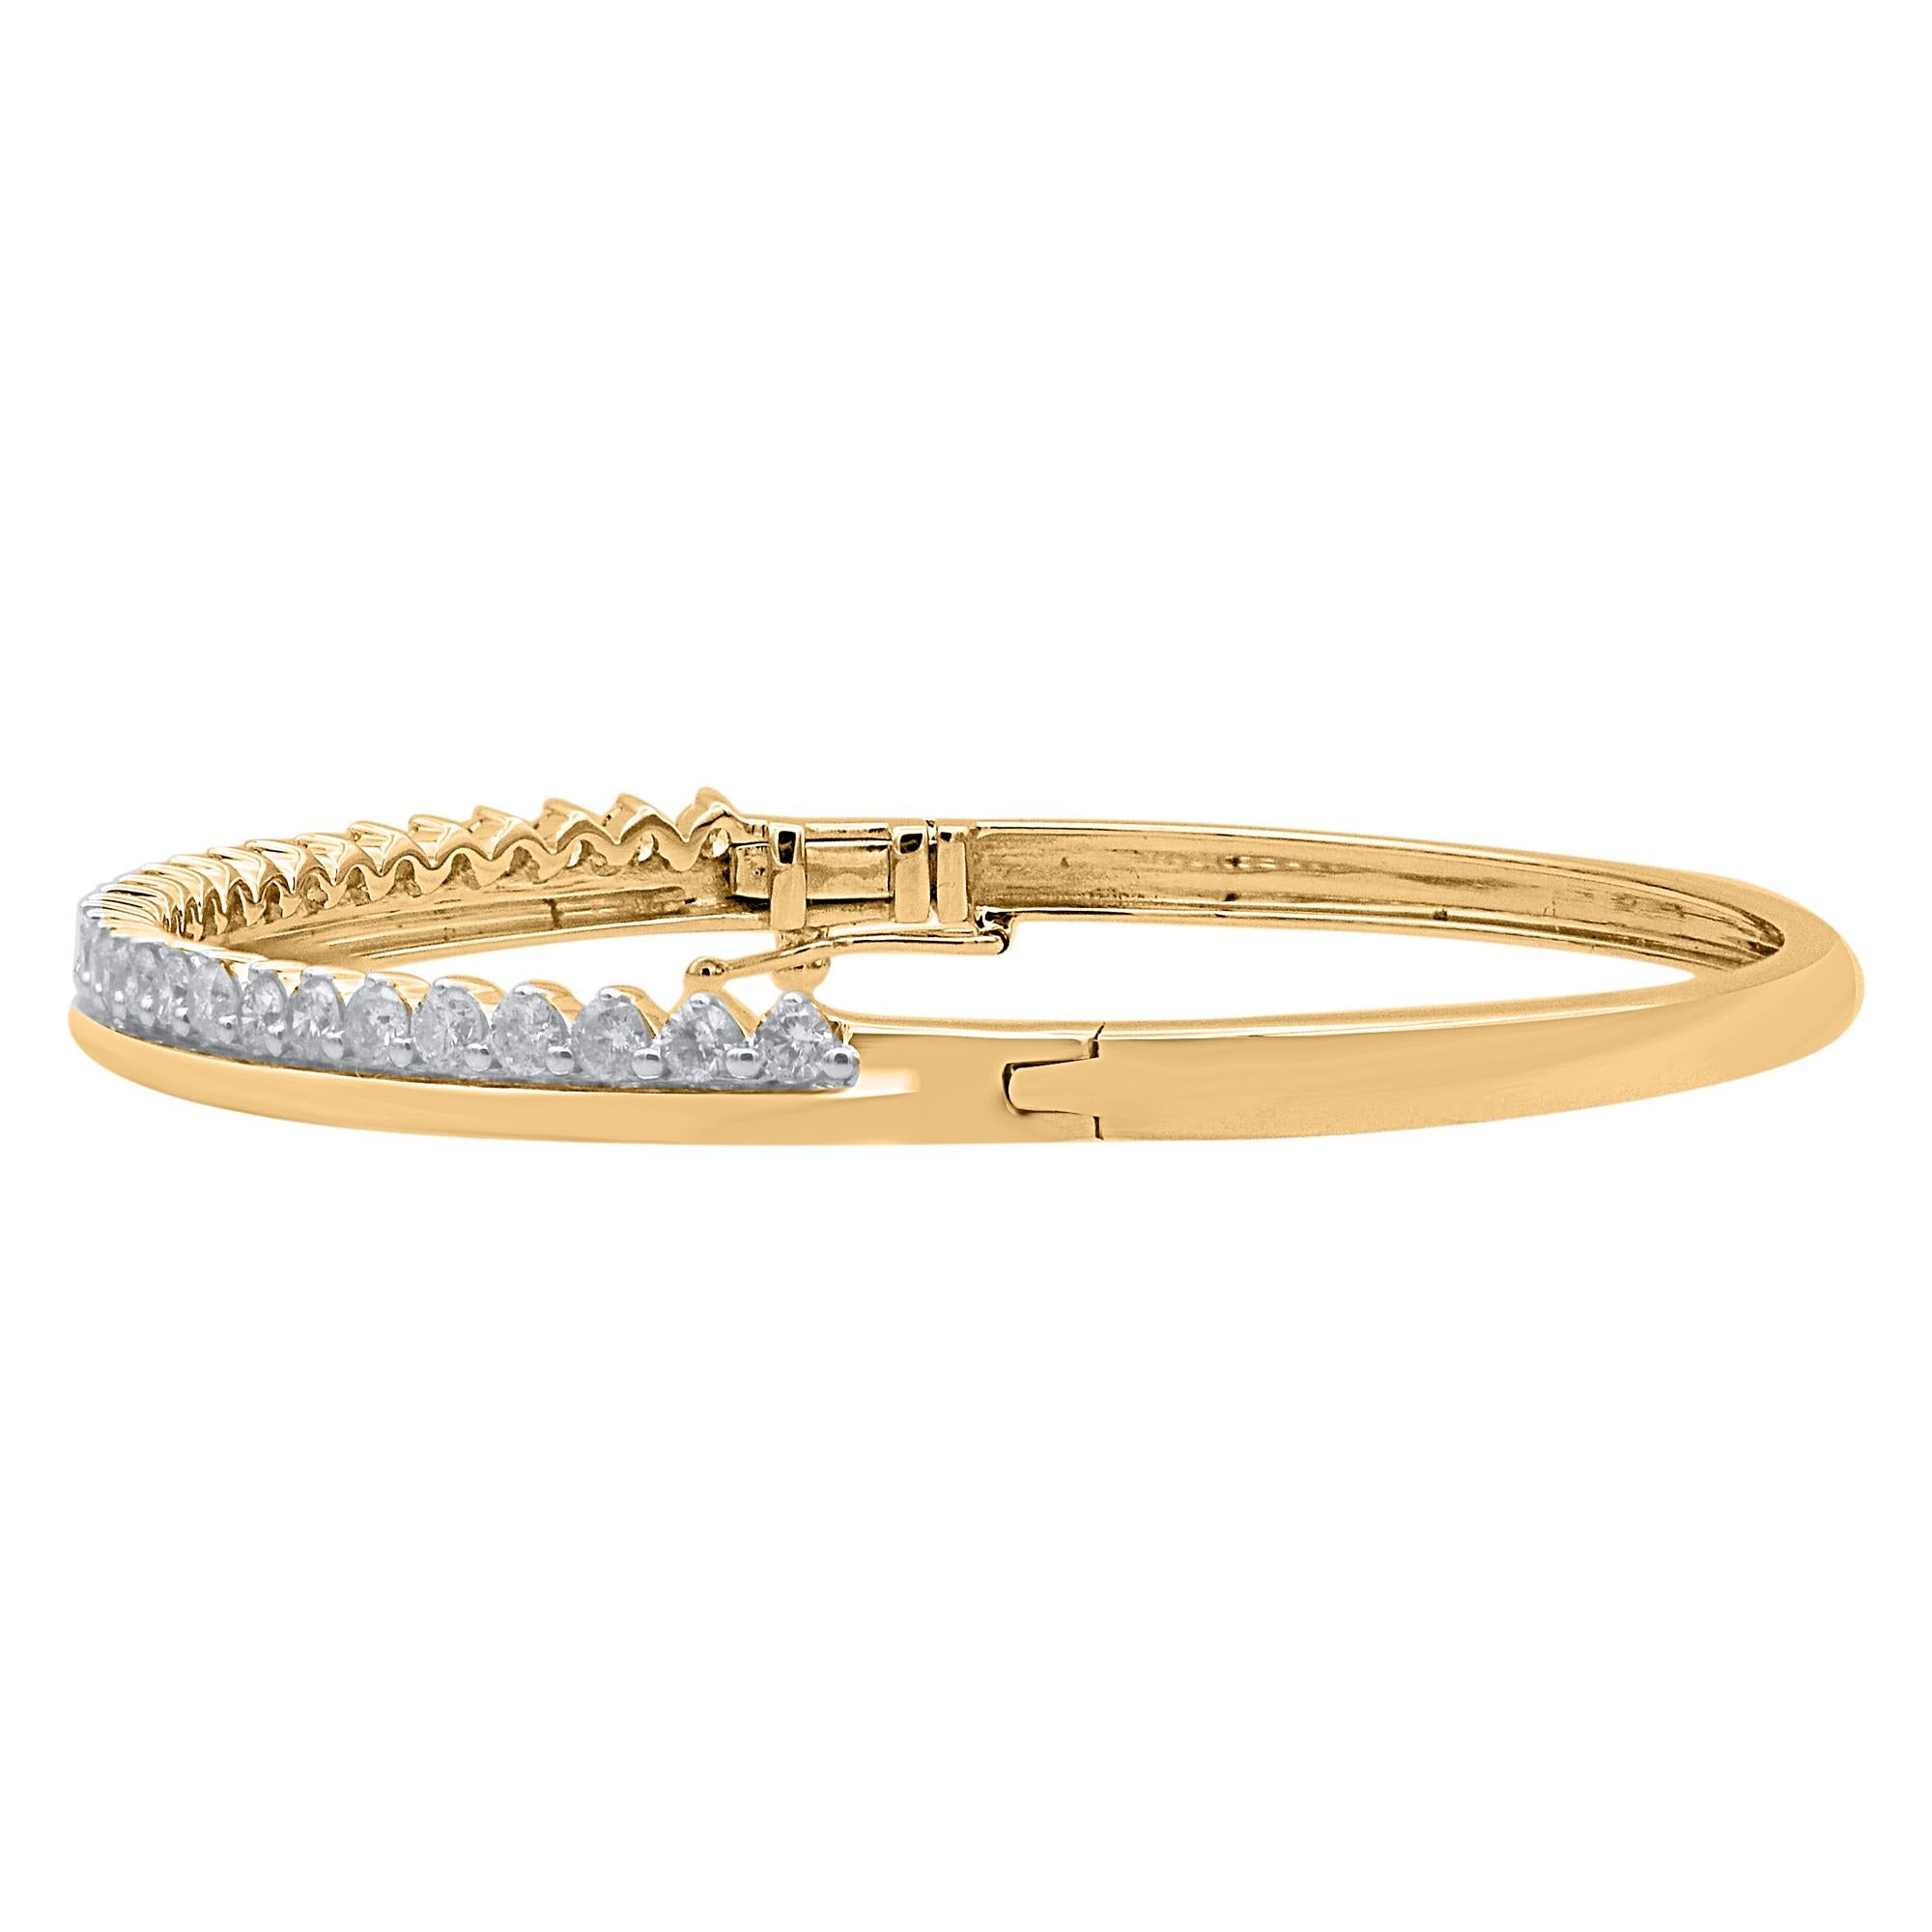 Classic and sophisticated, this diamond bangle bracelet pairs well with any attire.
This Shimmering bangle features 29 brilliant cut natural diamonds in prong setting and crafted in 14 kt yellow gold. Diamonds are graded H-I color, I2 clarity. 
